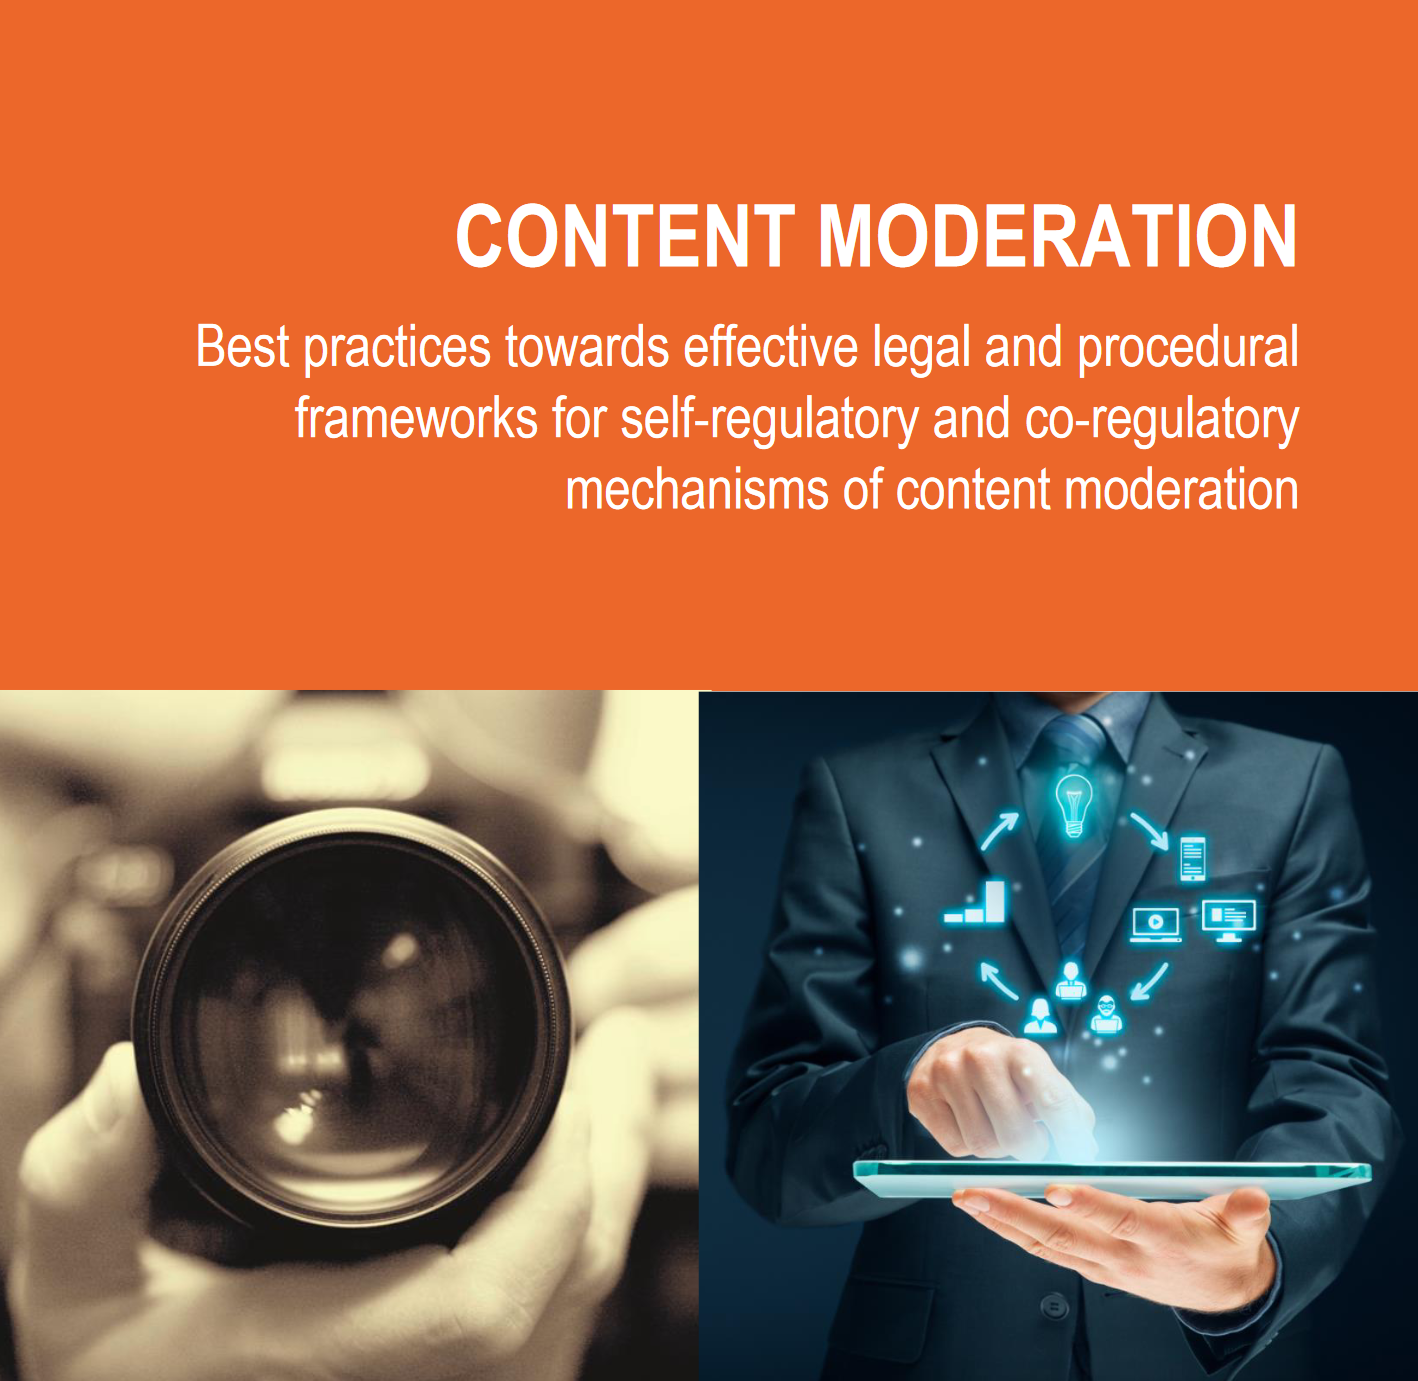 Guidance note on Best practices towards effective legal and procedural frameworks for self-regulatory and co-regulatory mechanisms of content moderation